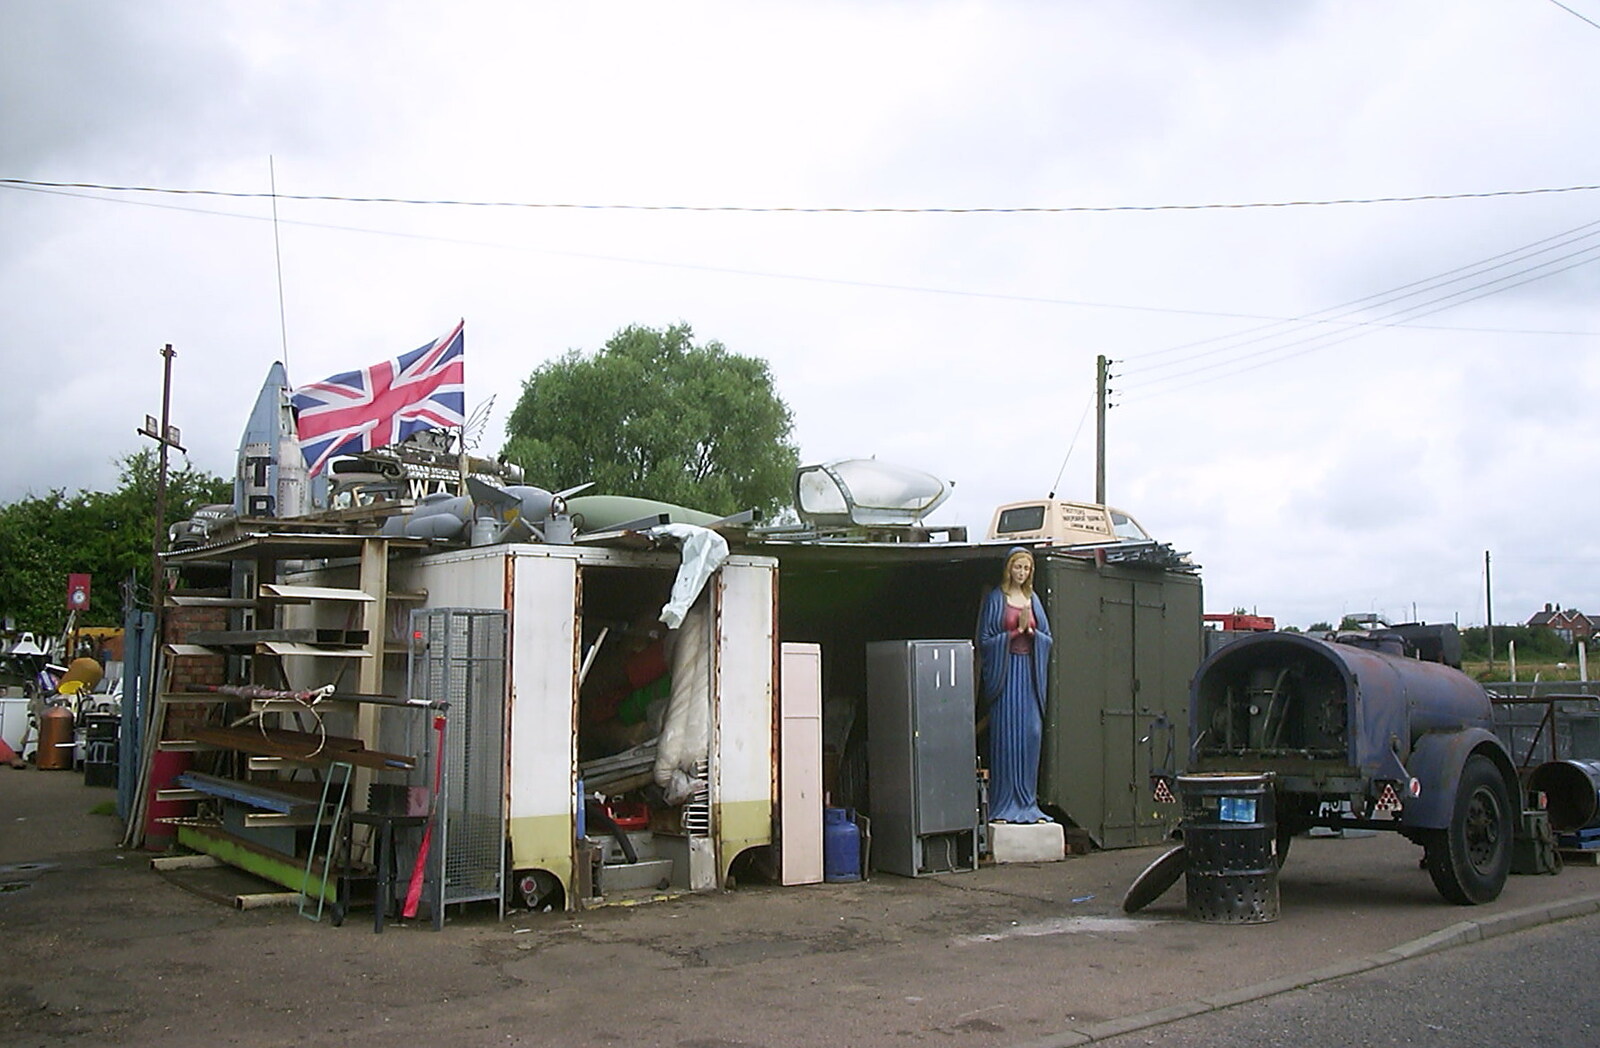 Pete Gillings' scrap yard from A Hard-Drive Clock and Other Projects, Brome, Suffolk - 28th June 2002